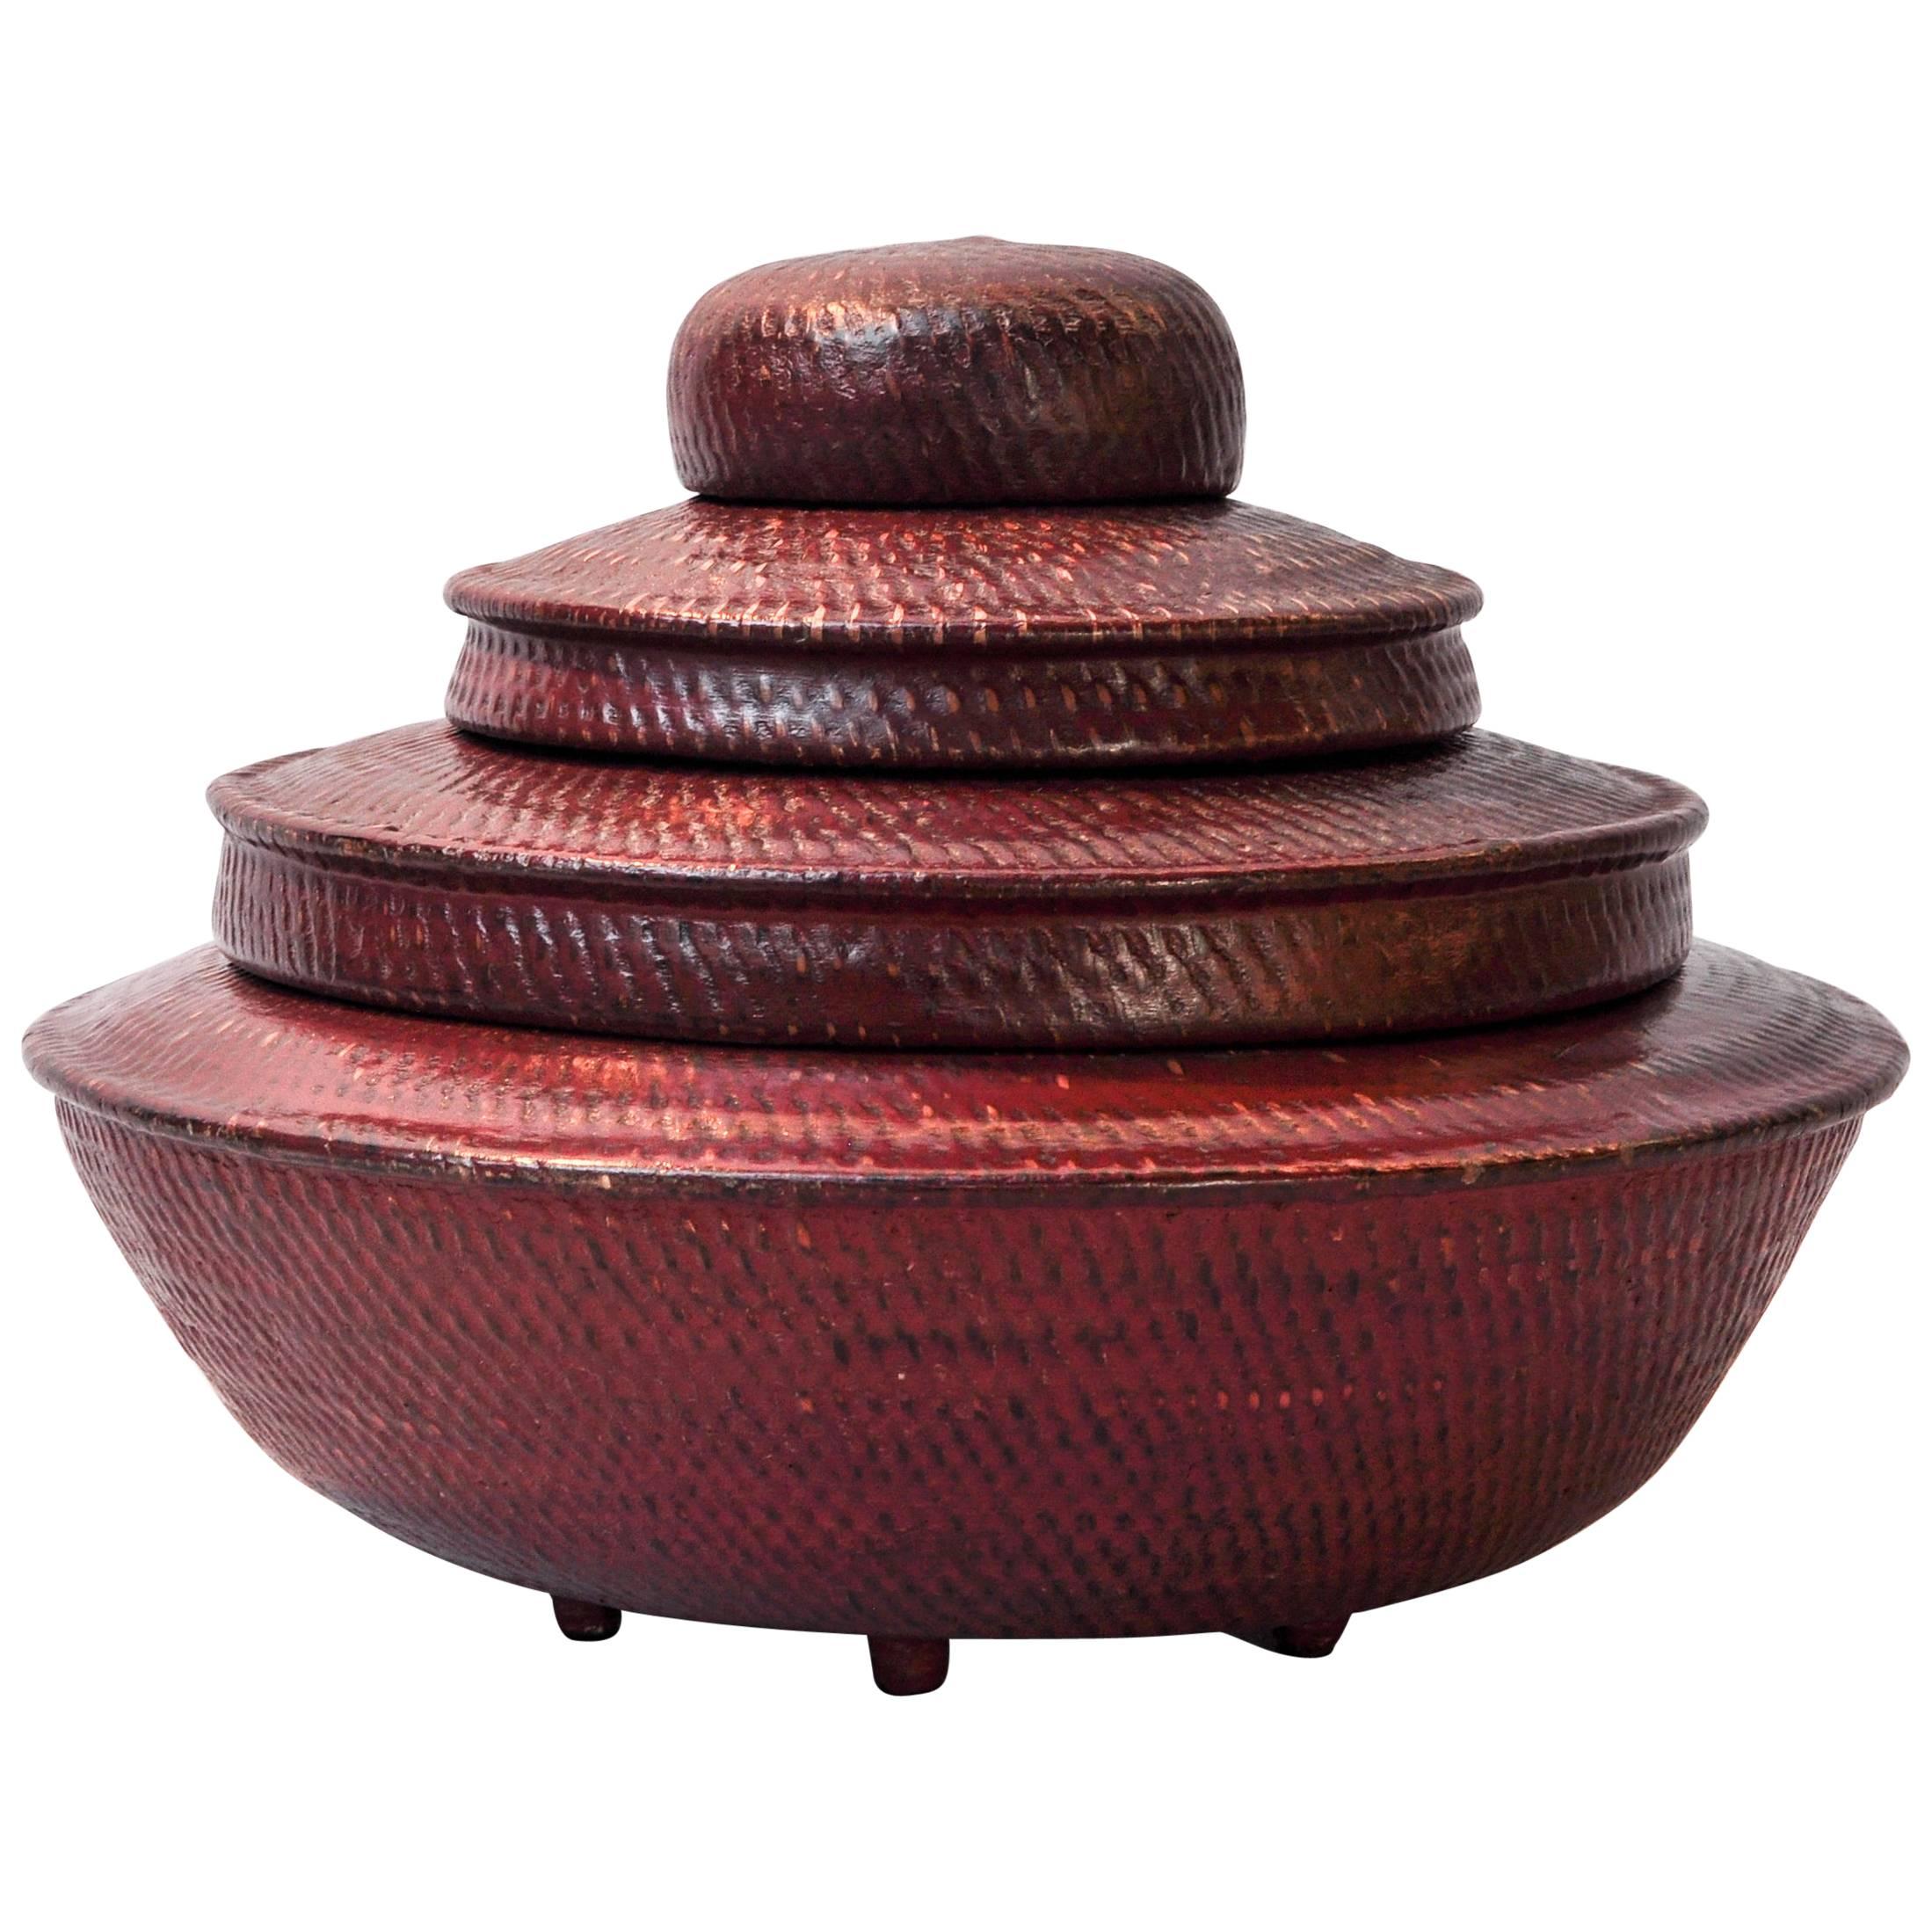 Tiered Red Lacquer Offering Vessel, Hsun Gwet, Burma, Mid-20th Century, Rattan